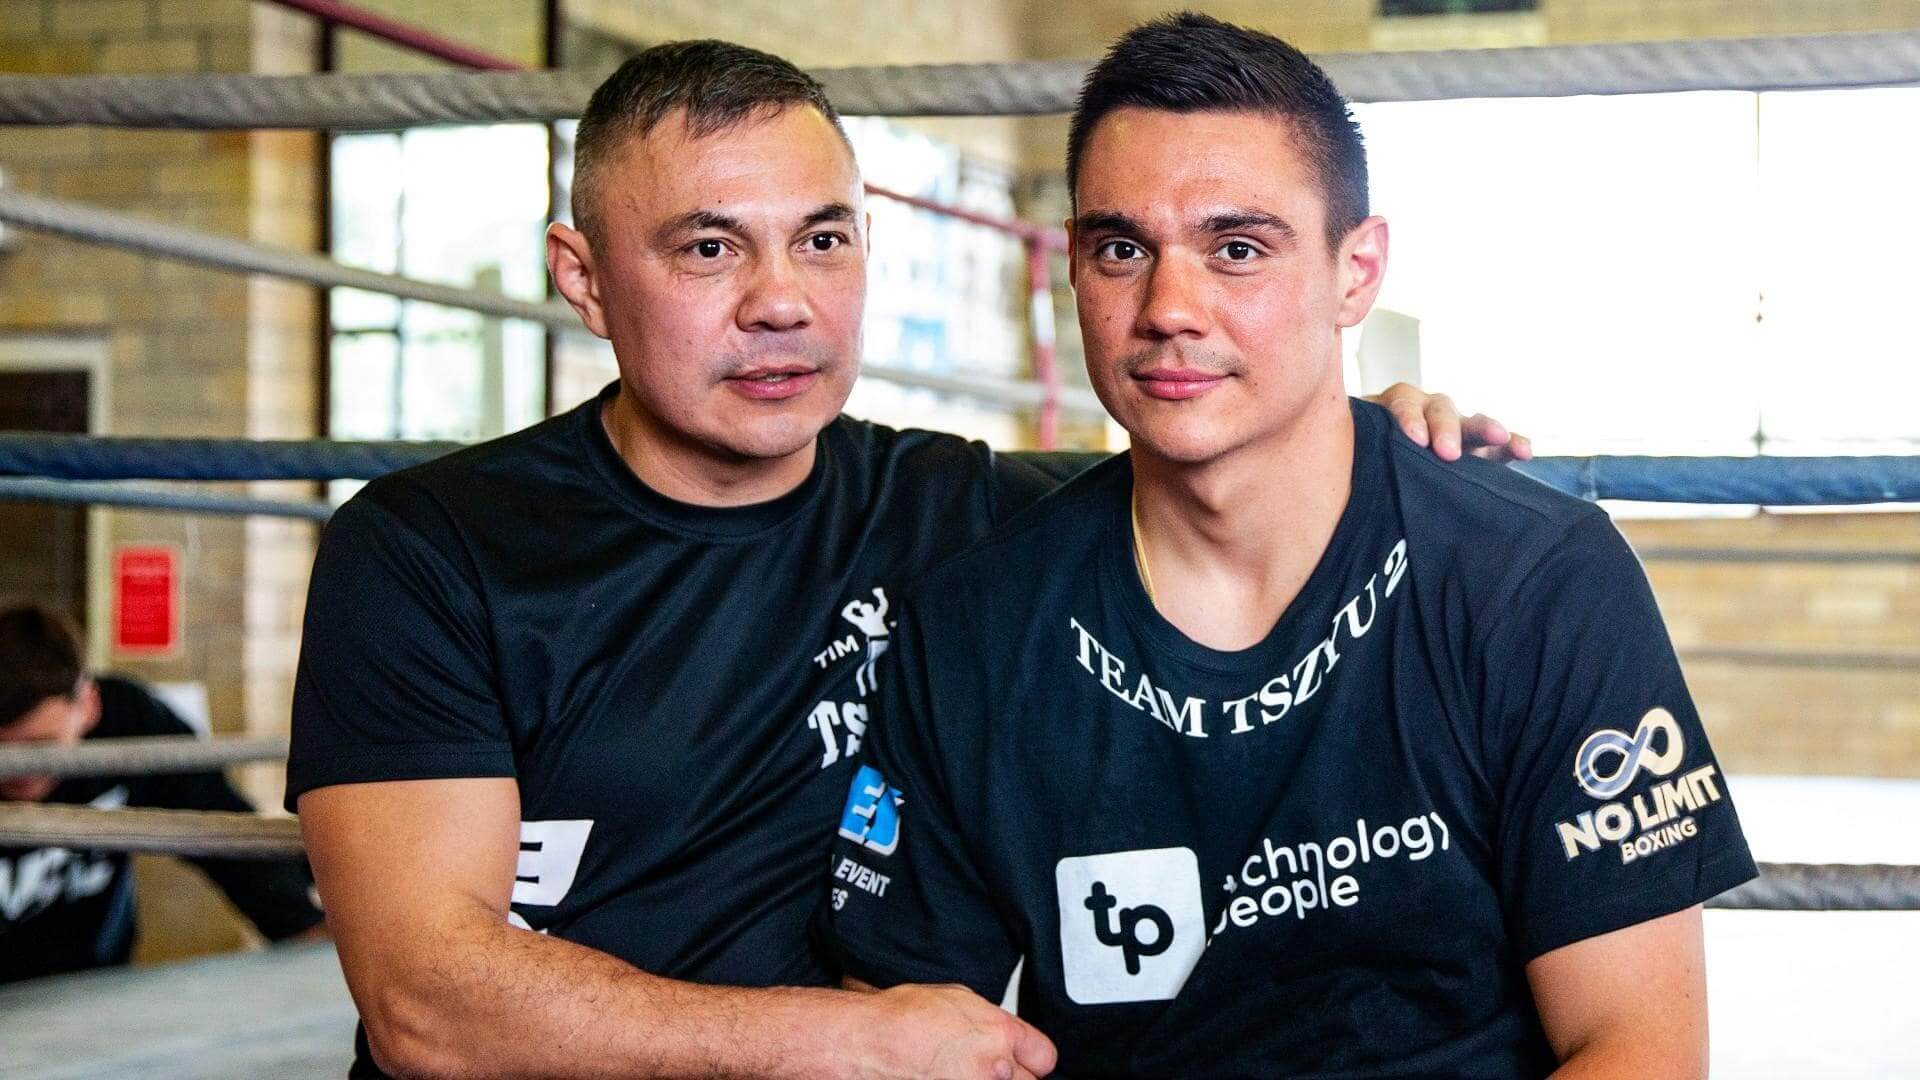 Tim Tszyu Feels Jermell Charlo Is The Worse Of The Two Charlo Brothers